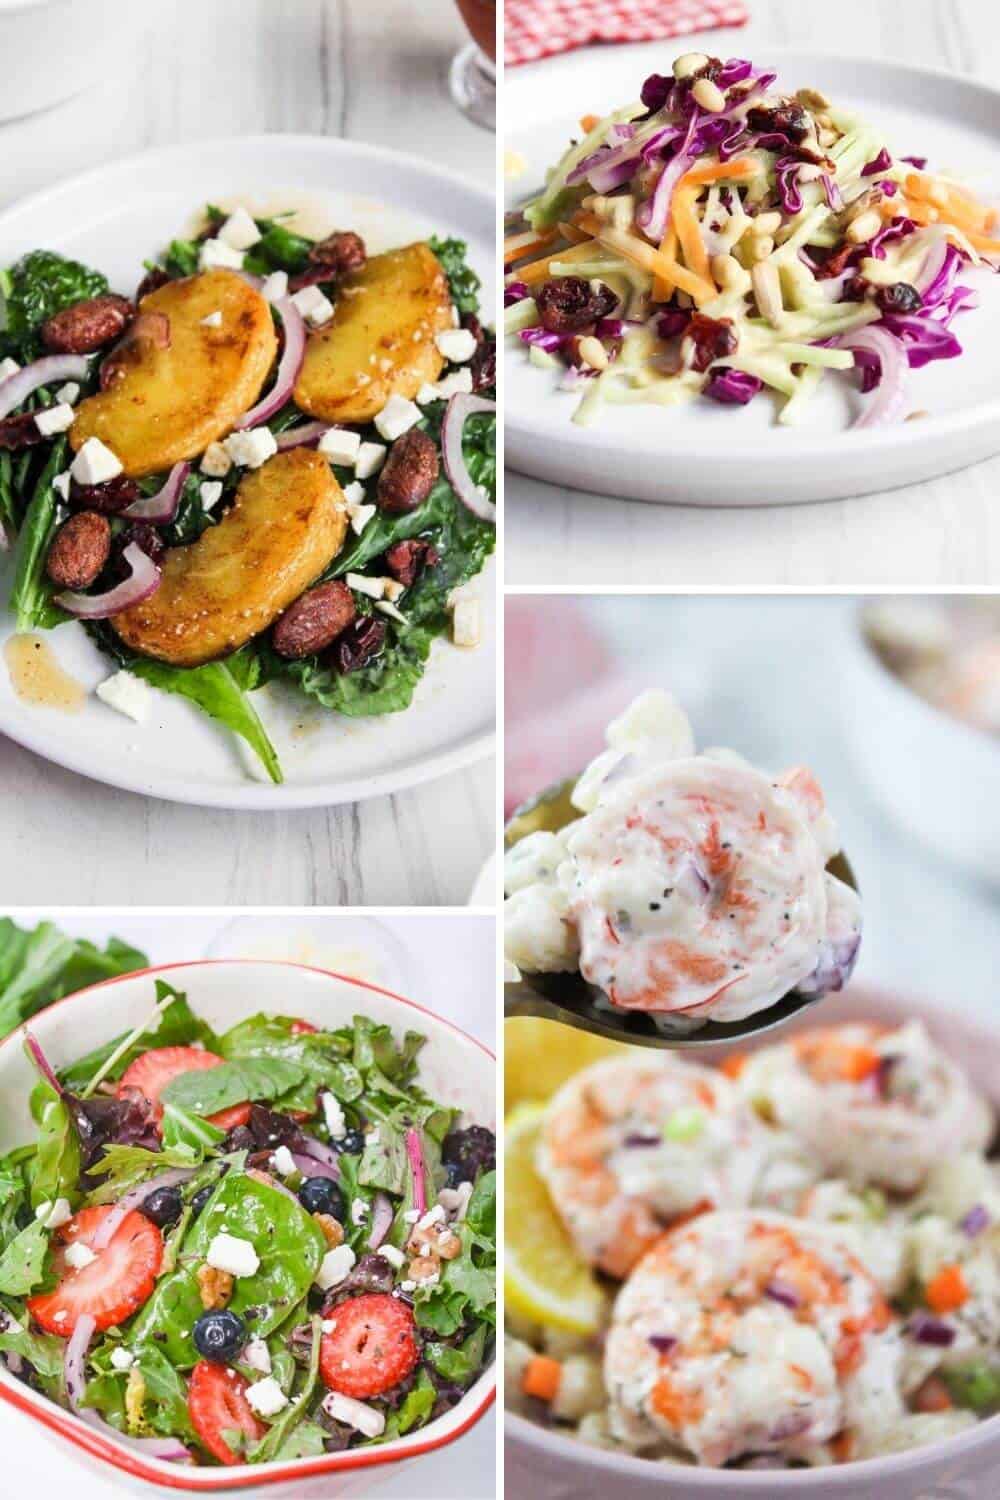 A collage of colorful pictures of salads on plates to brighten and add freshness to your table.